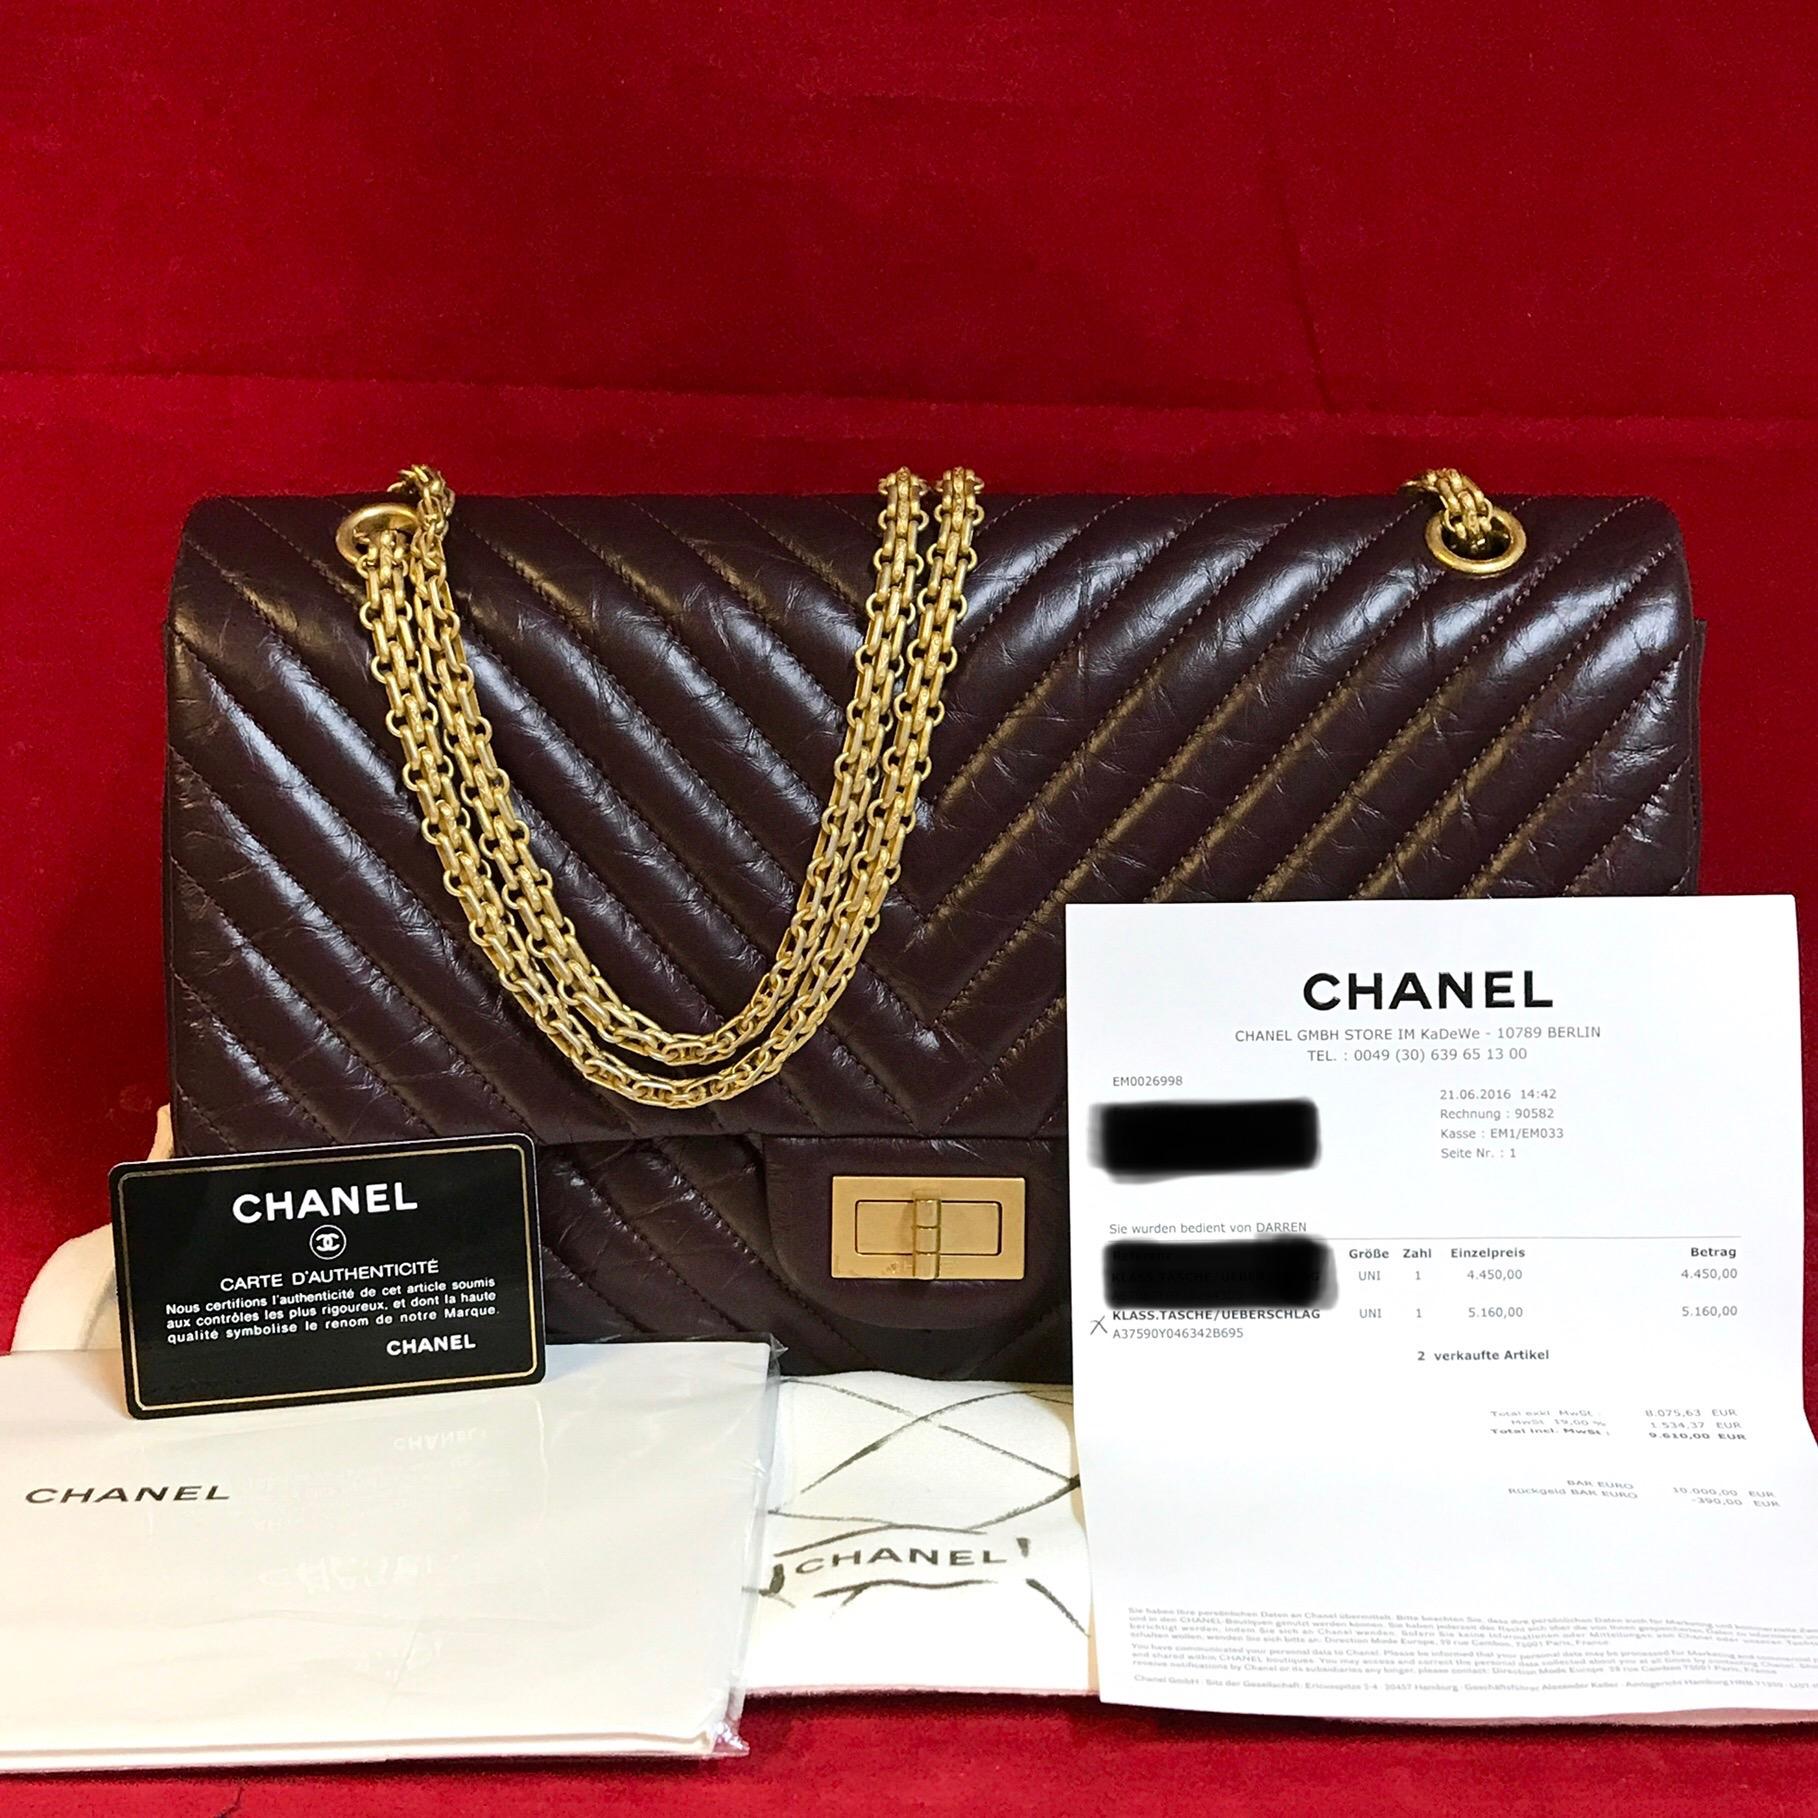 Limited CHANEL 2.55 double flap Bag made of bordeaux distressed chevron lambskin.

The bag is in a very good condition and has minimal signs of use.

The delivery includes:
- Limited Chanel 2.55 double flap bag
- Dustbag
- warranty card
- Original